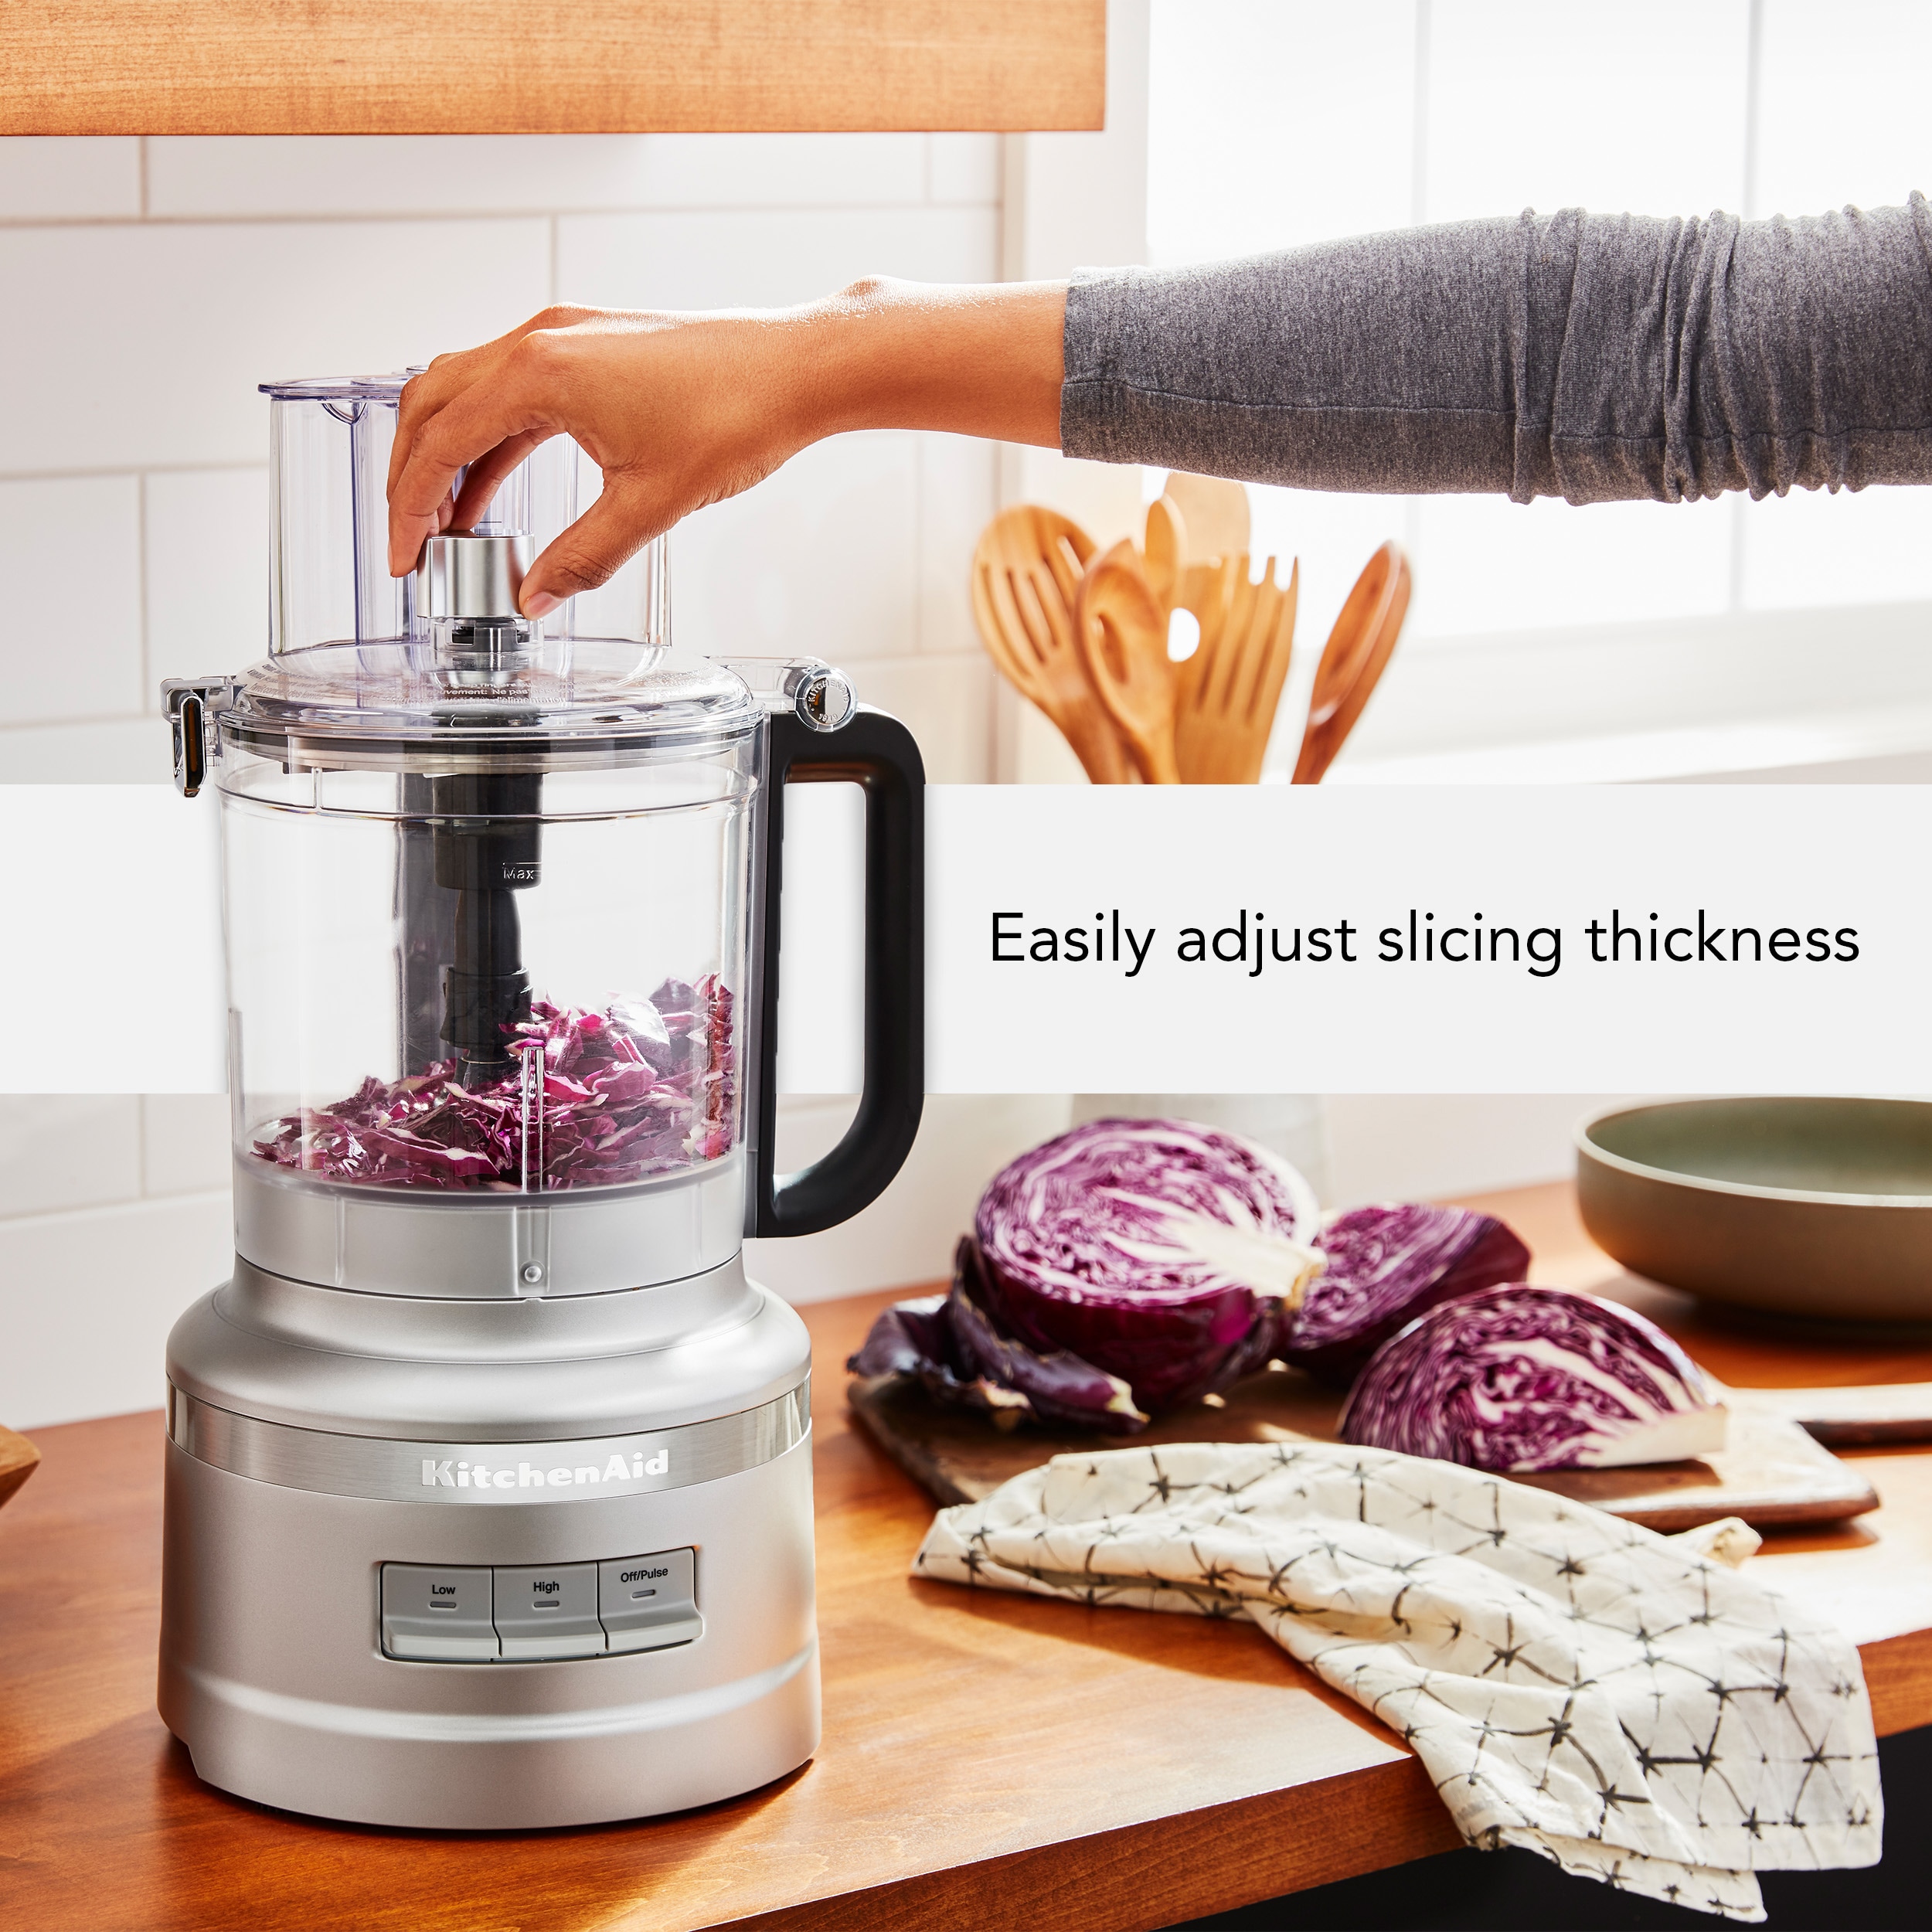 500W Professional Food Chopper with 3 Blades, 3-Speed Adjustment, Dual  Safety Lock Design, Large Capacity Bowls, for Crushing, Slicing, Shredding,  and Juicing